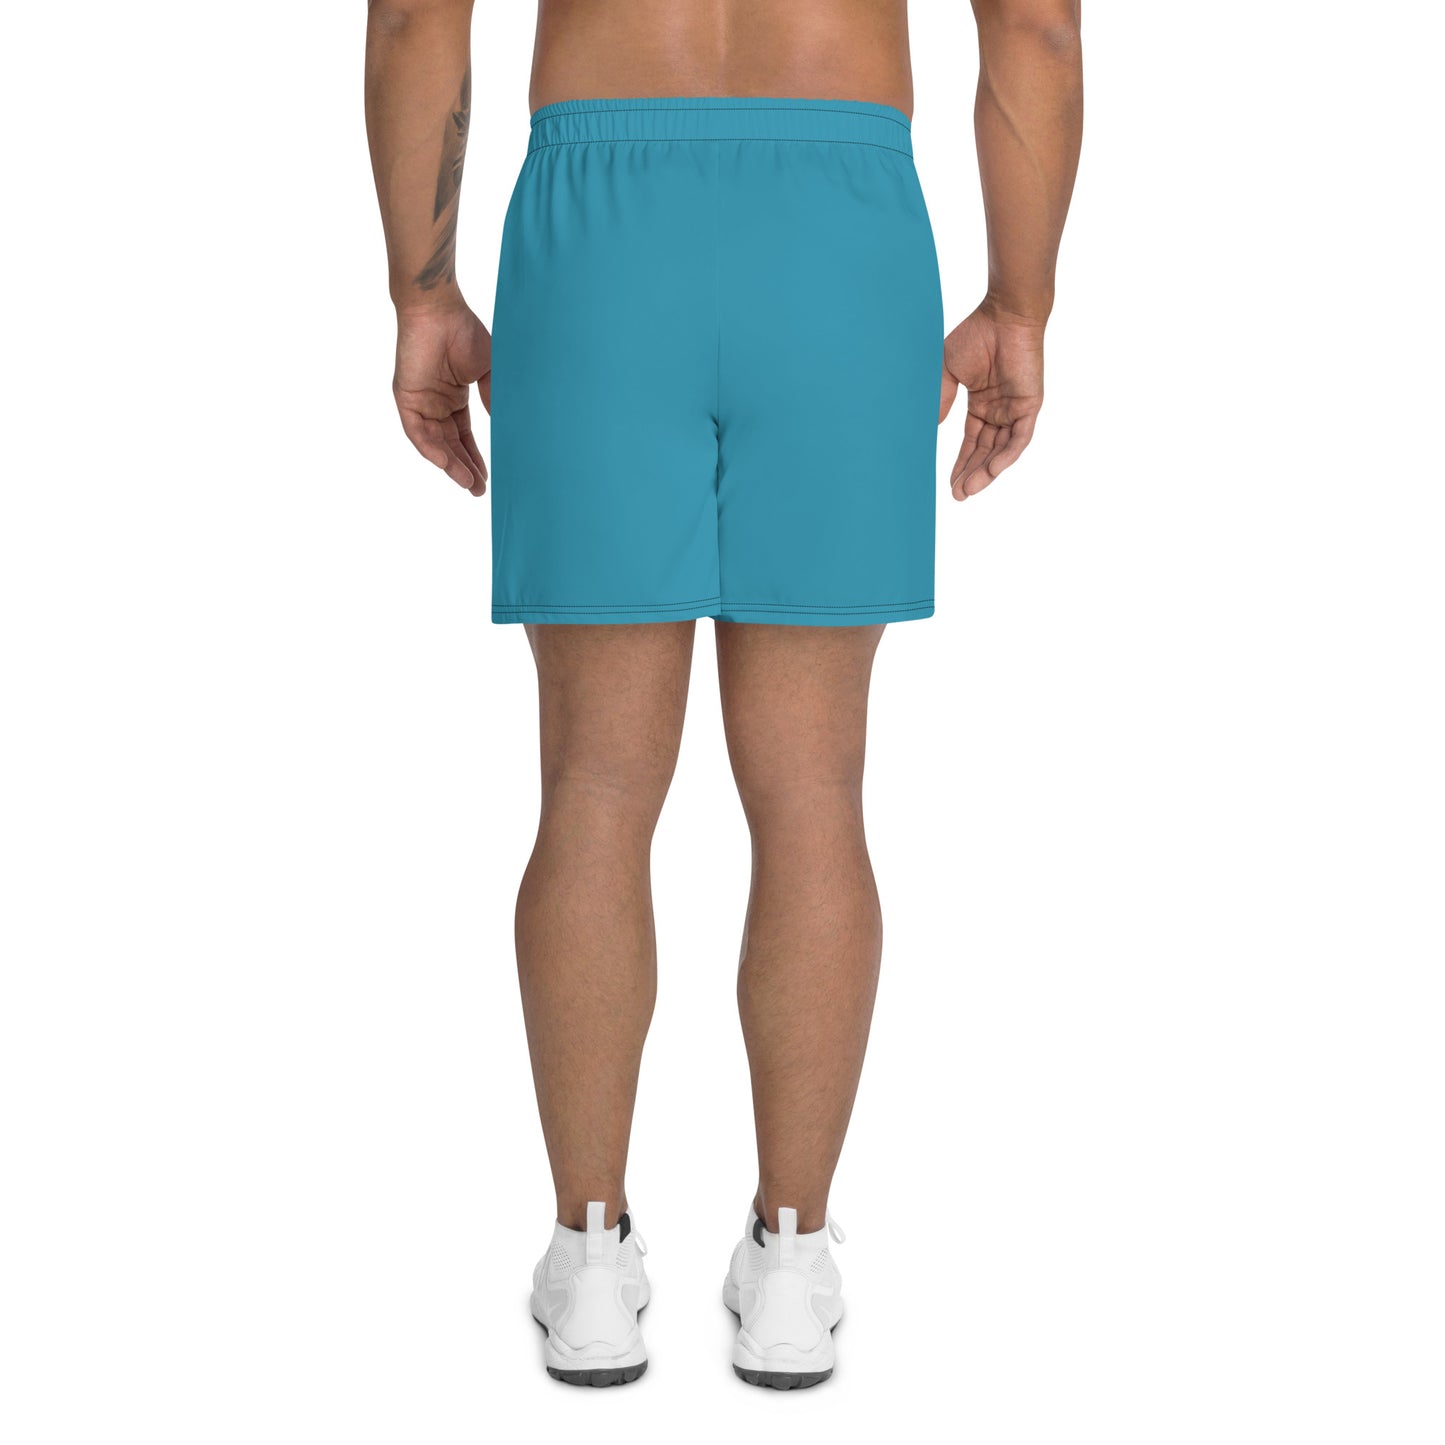 Mens LuxeStride Solid Blue Shorts